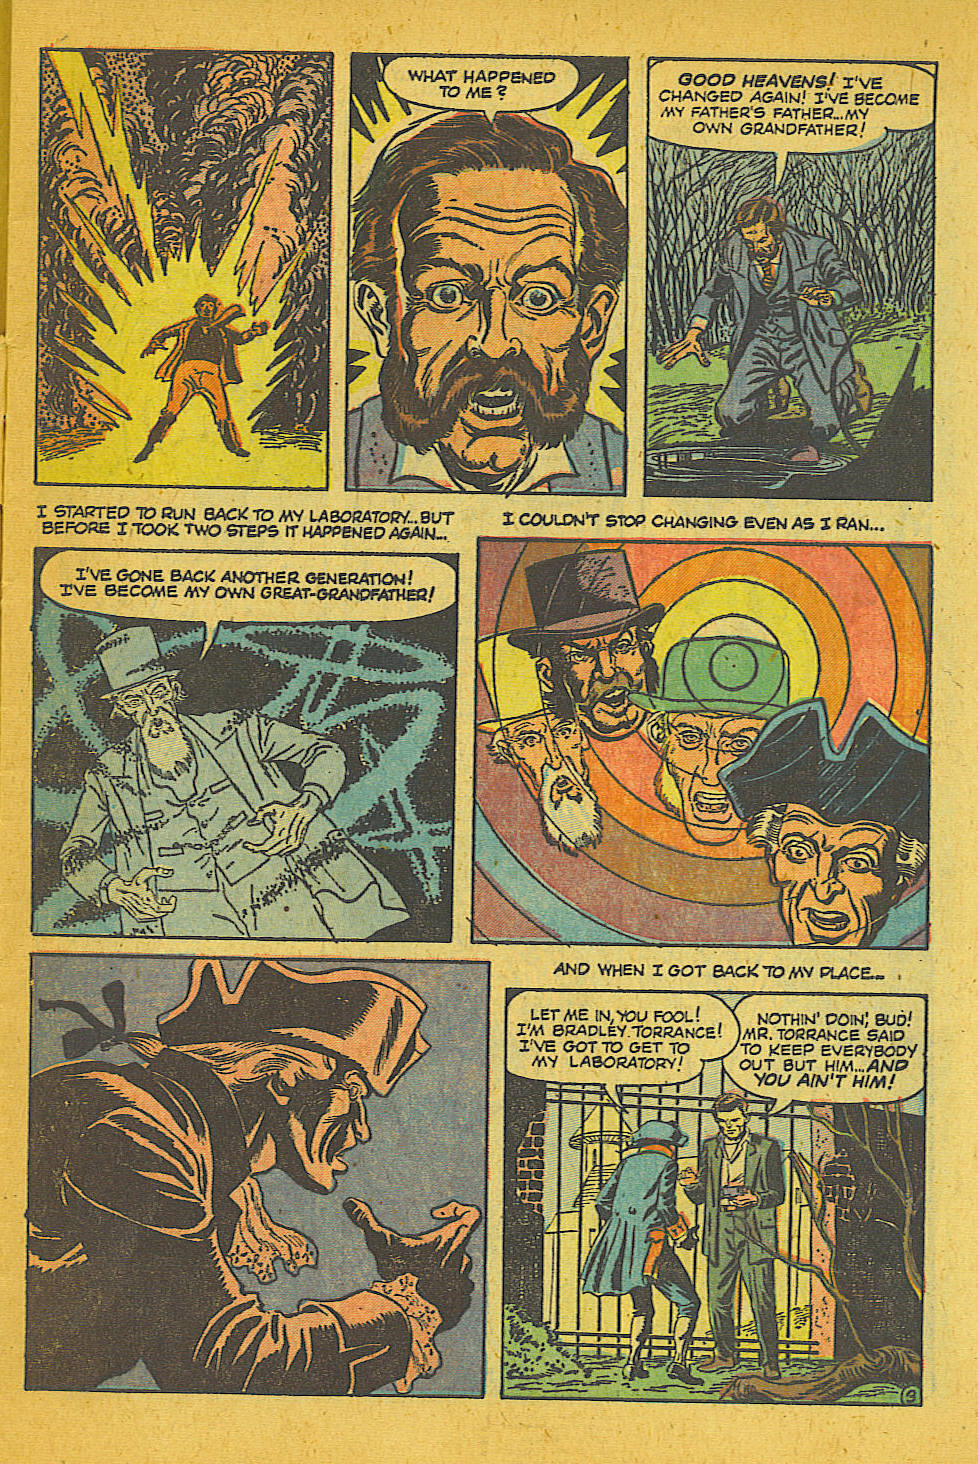 Marvel Tales (1949) 111 Page 3